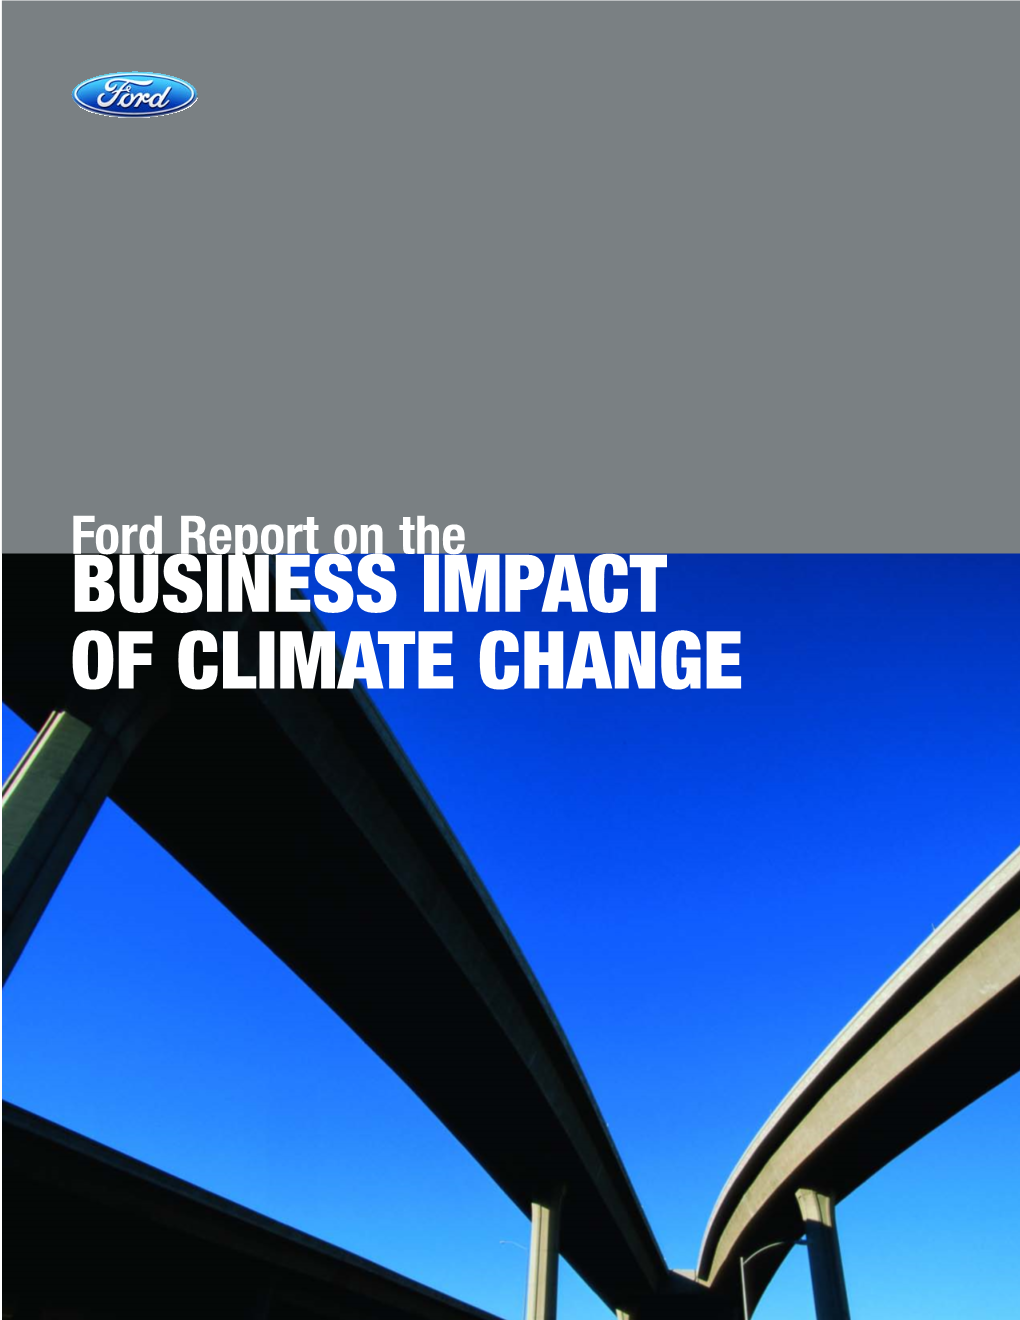 View the Ford Report on the Business Impact of Climate Change